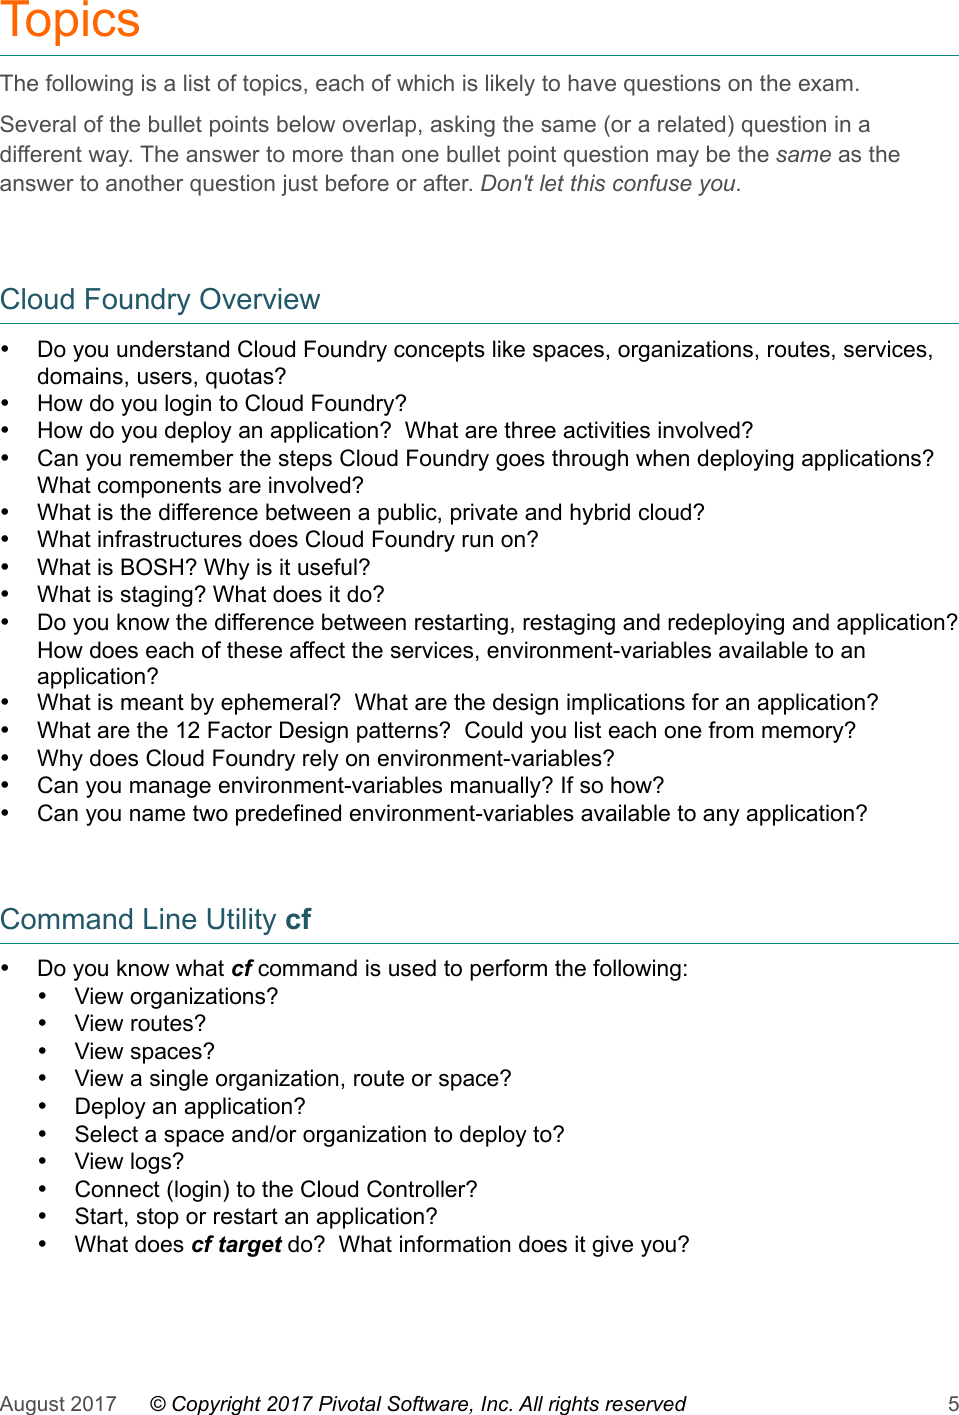 Page 5 of 9 - Big Data Vendor PCF-Dev1.6-1.11-Certification-Study-Guide